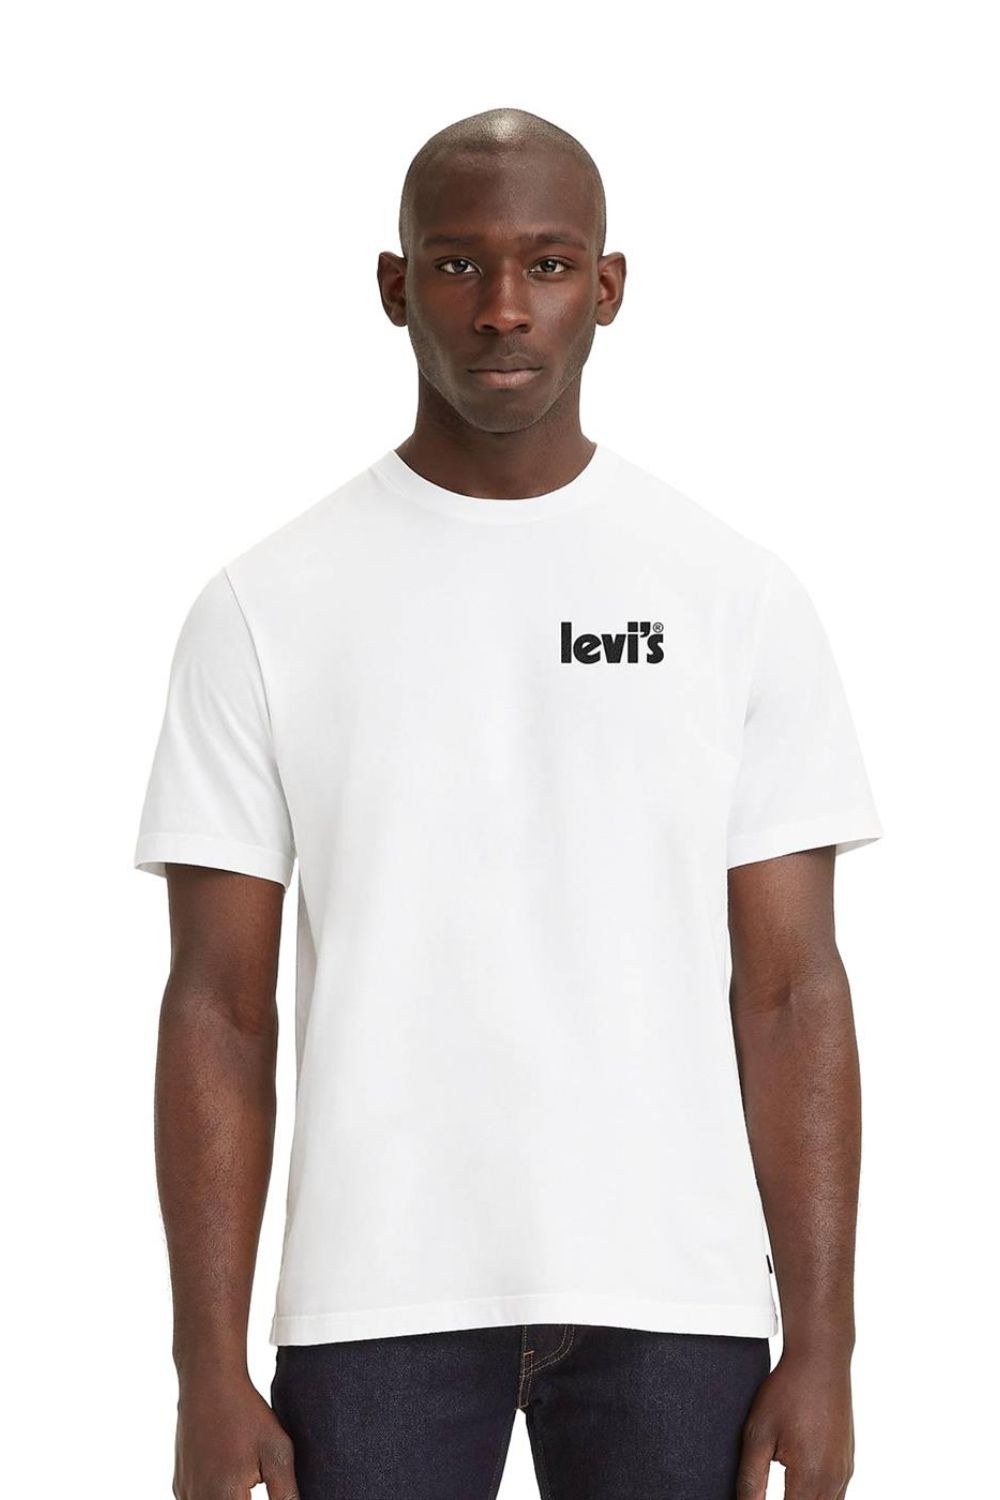 Levis Relaxed Fit Tshirt - Hyper Shops